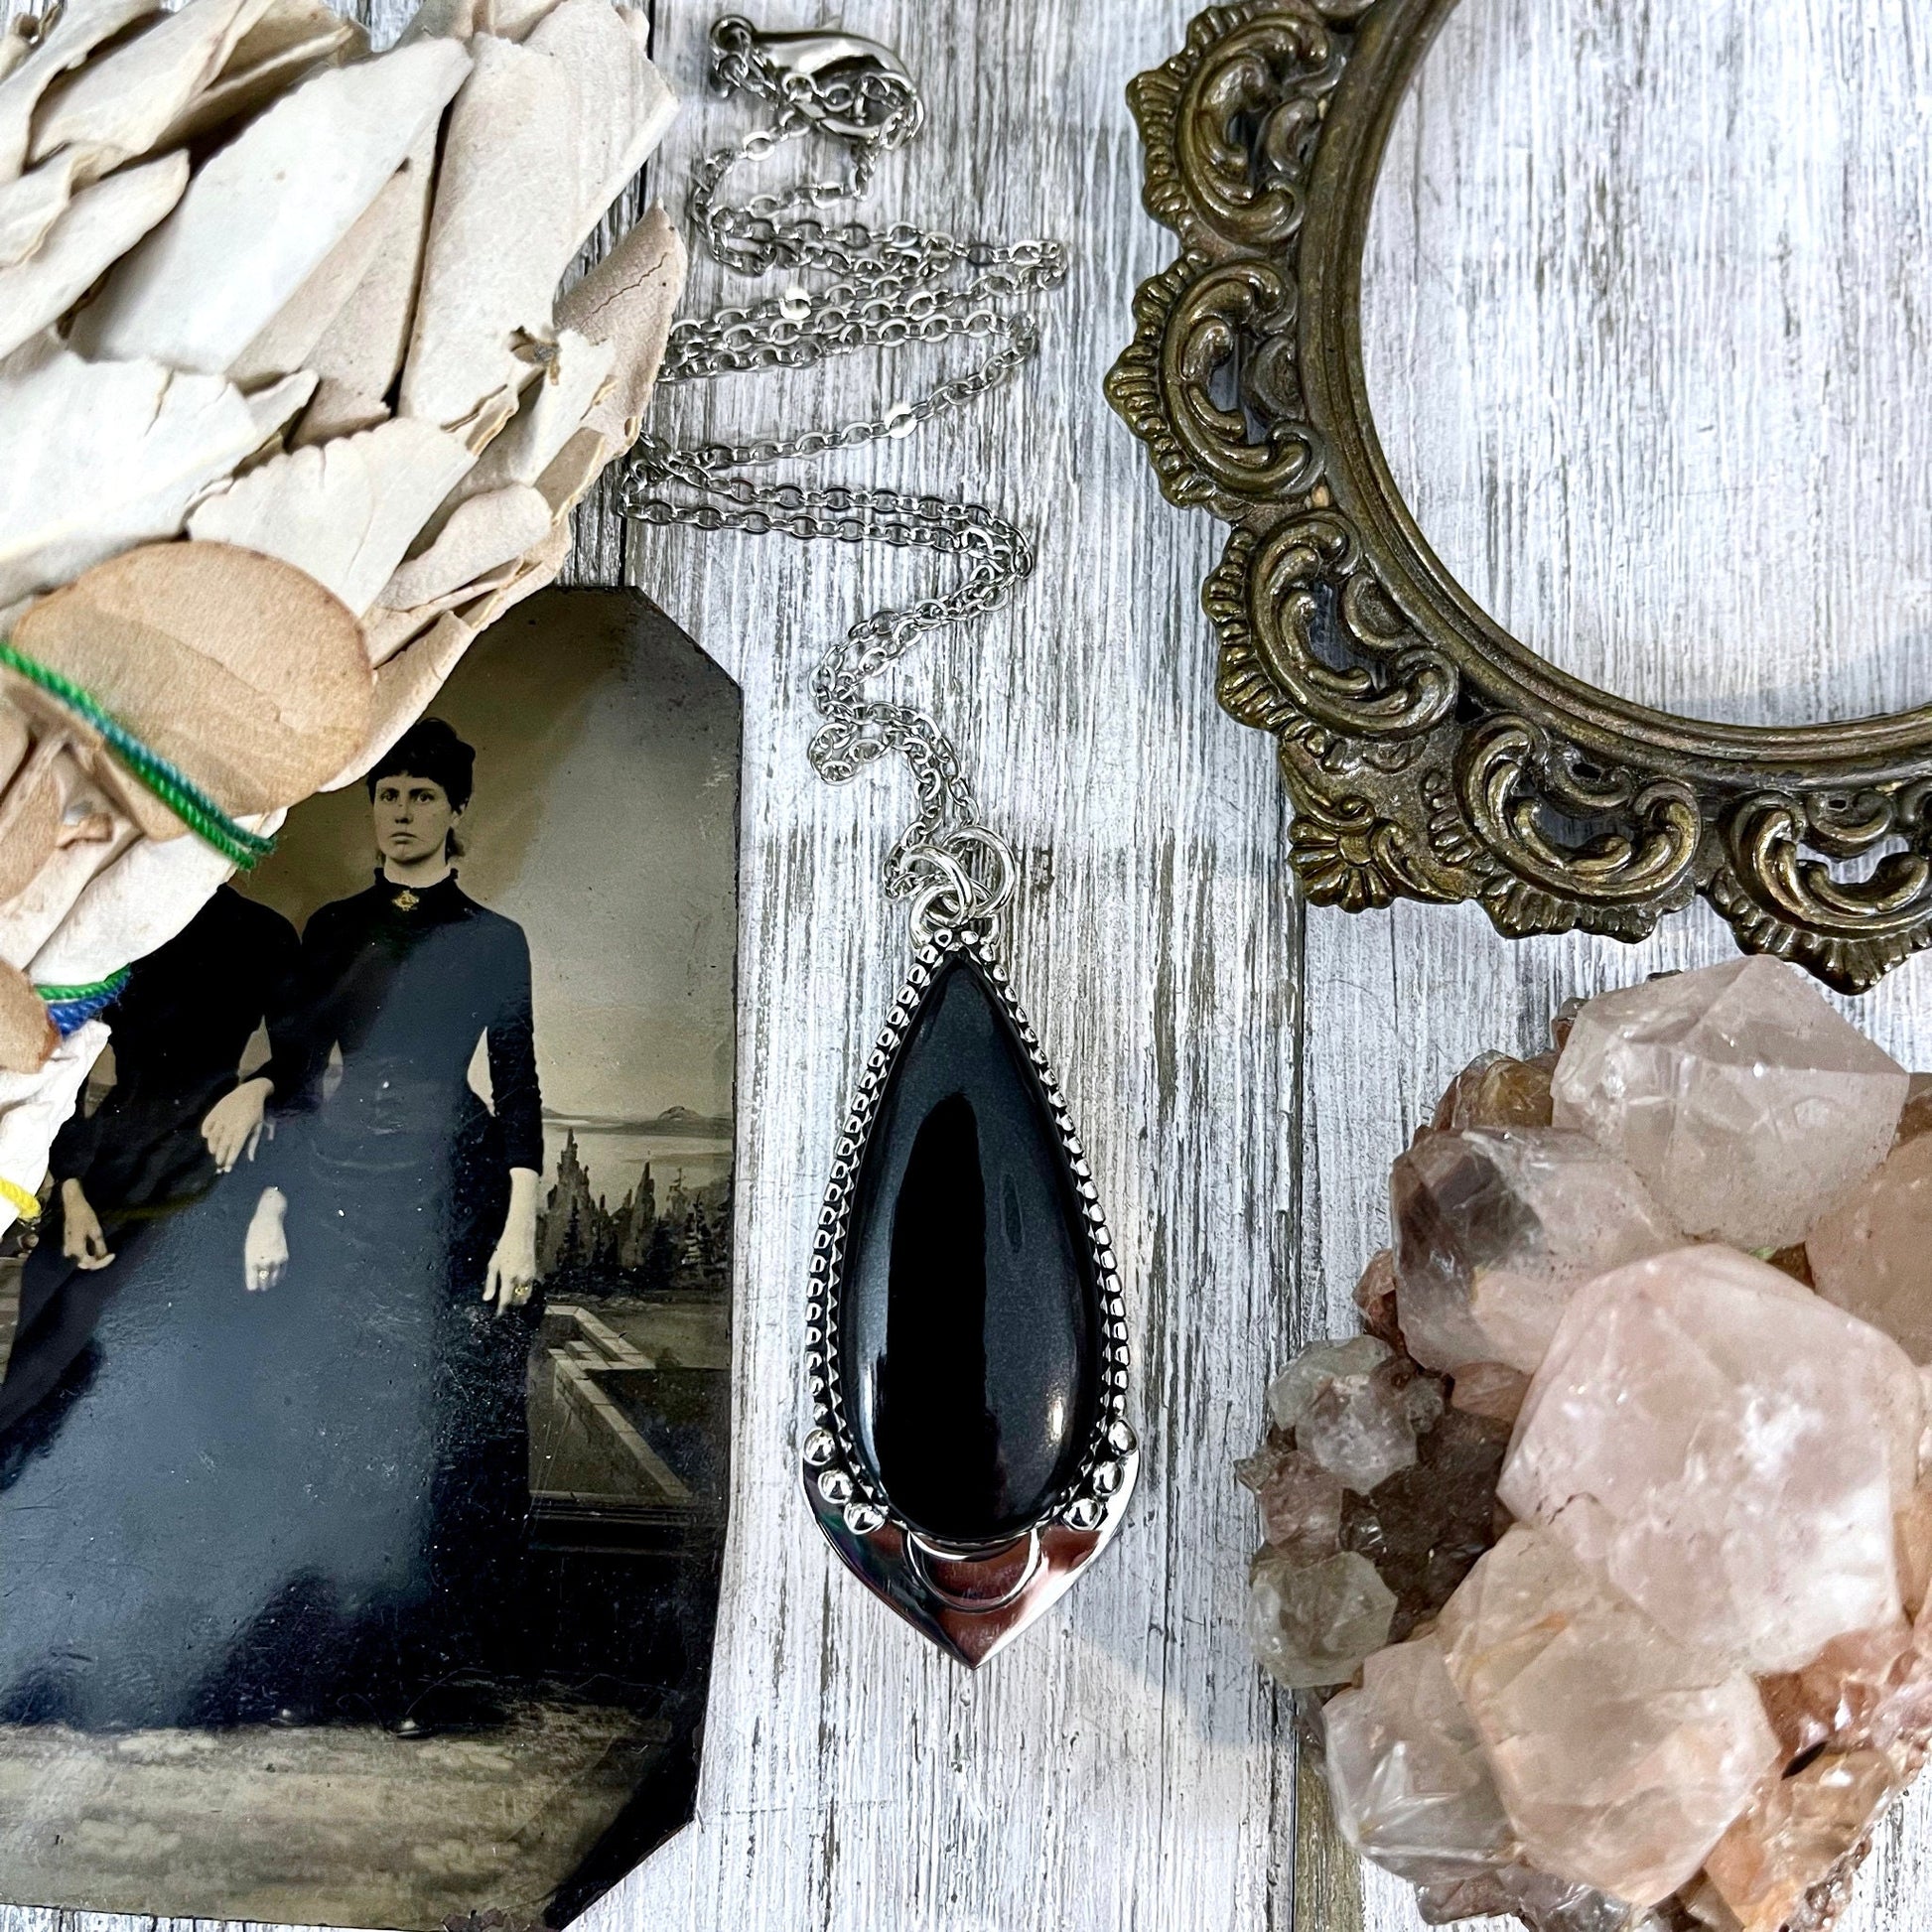 Midnight Moon Necklace- Black Onyx Crystal Teardrop Necklace in Sterling Silver -Designed by FOXLARK Collection/ Witchy Crystal Necklace - Foxlark Crystal Jewelry